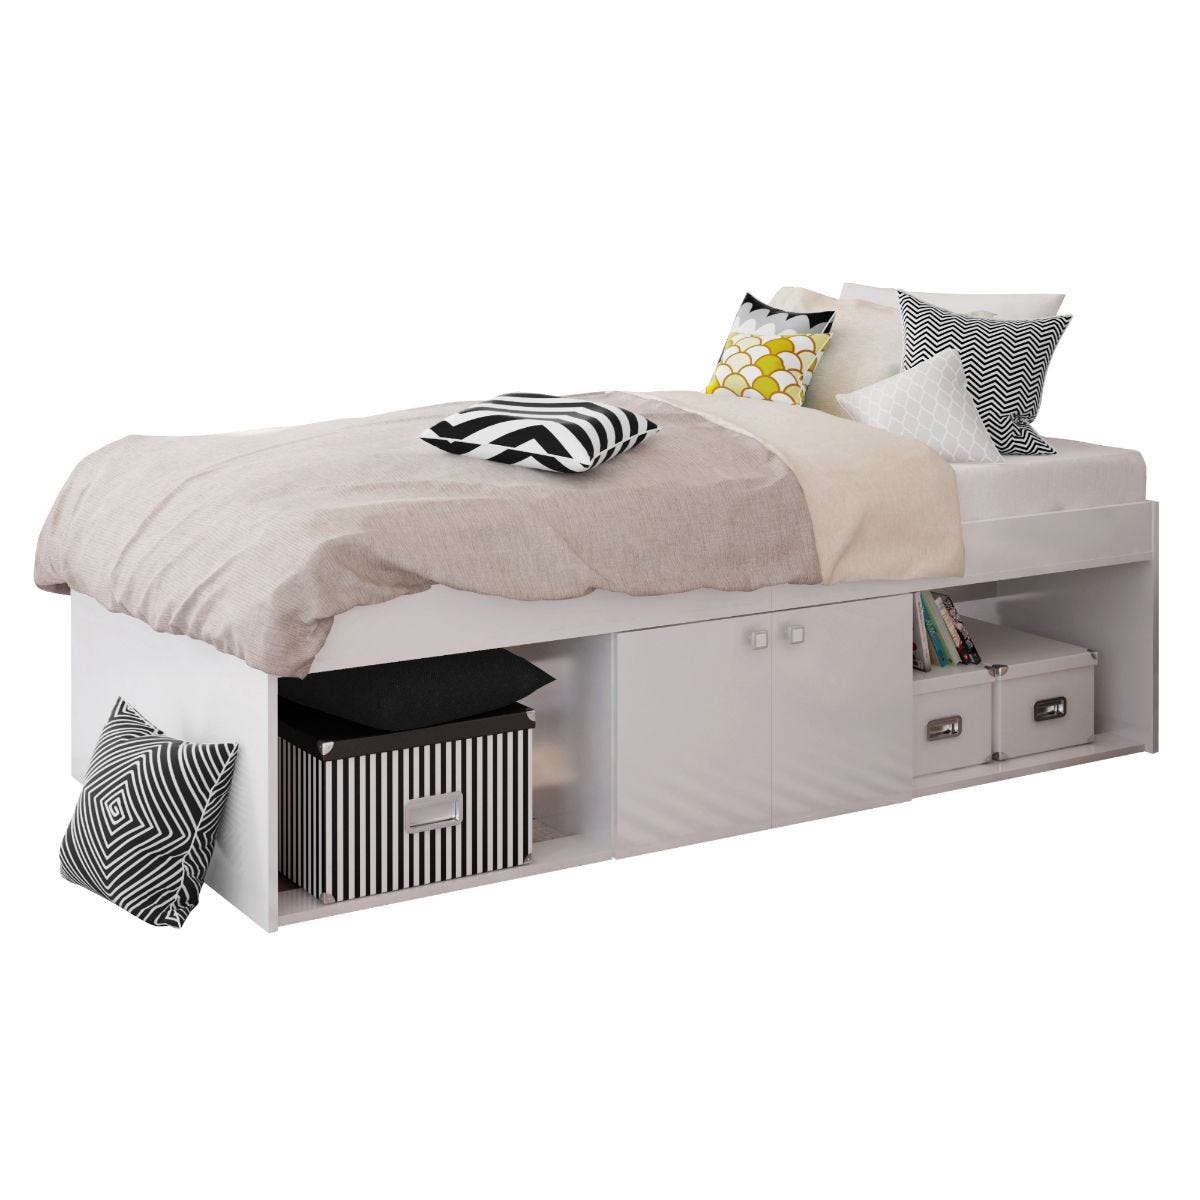 KUDL Low Single 3Ft Cabin Bed Open White